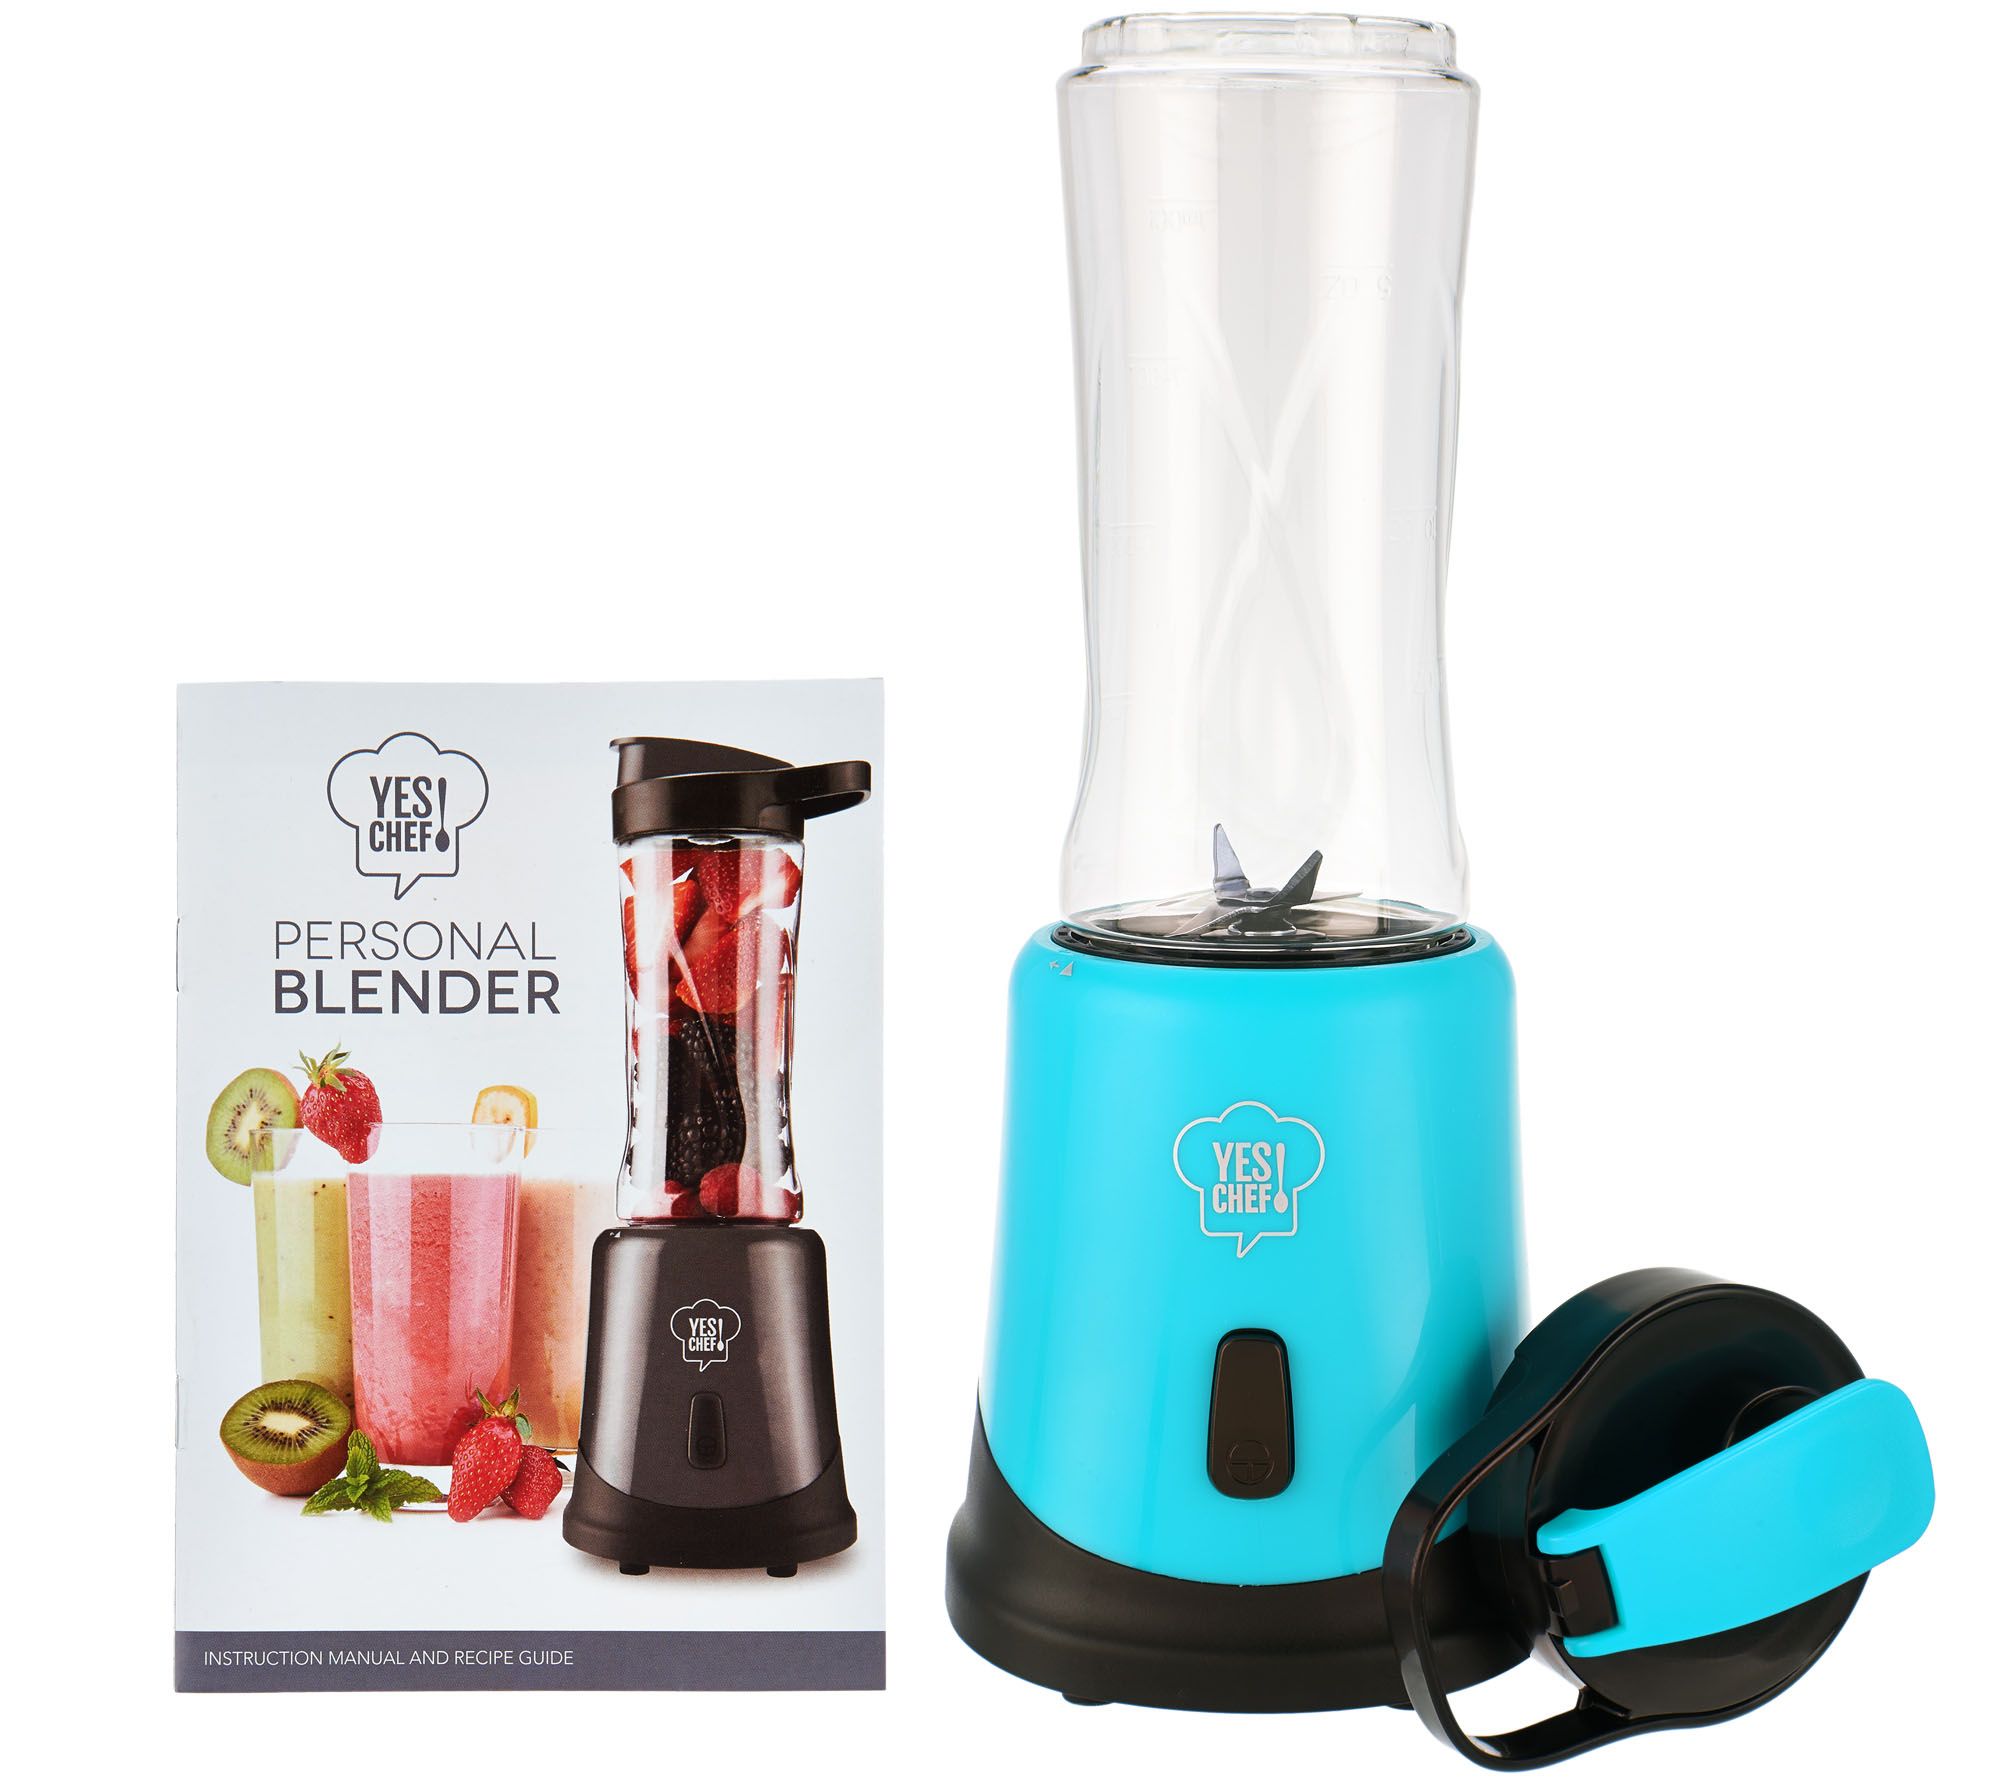 Starfrit 3 Speed Personal Blender with Travel Cup & Reviews